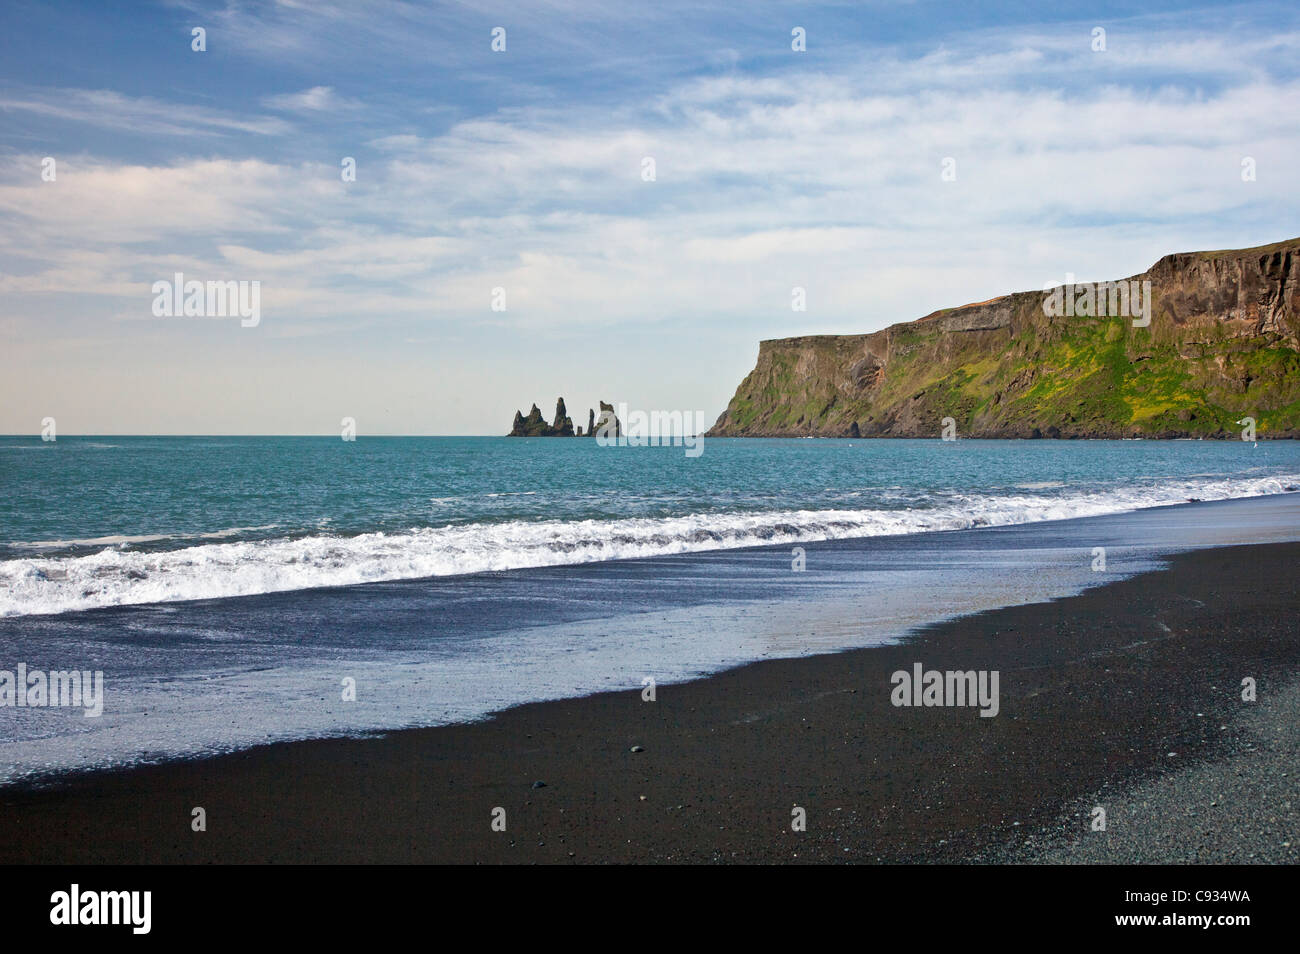 The beach at Vik with its long stretch of black basalt sand has been counted as one of the most alluring beaches on Earth. Stock Photo